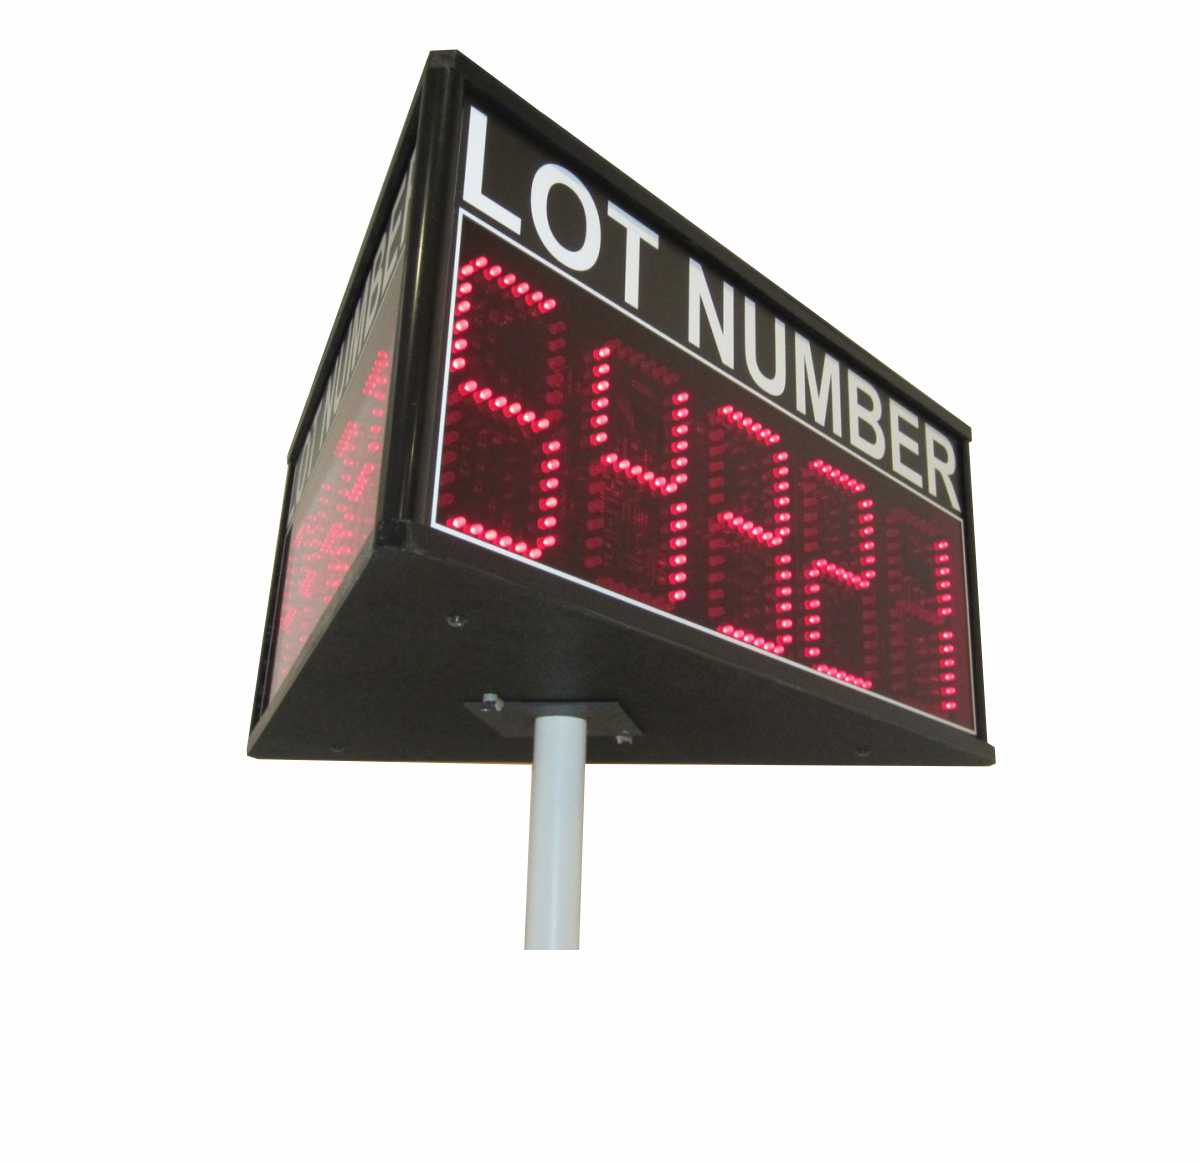 Three-Sided Auction Lot Number Sign